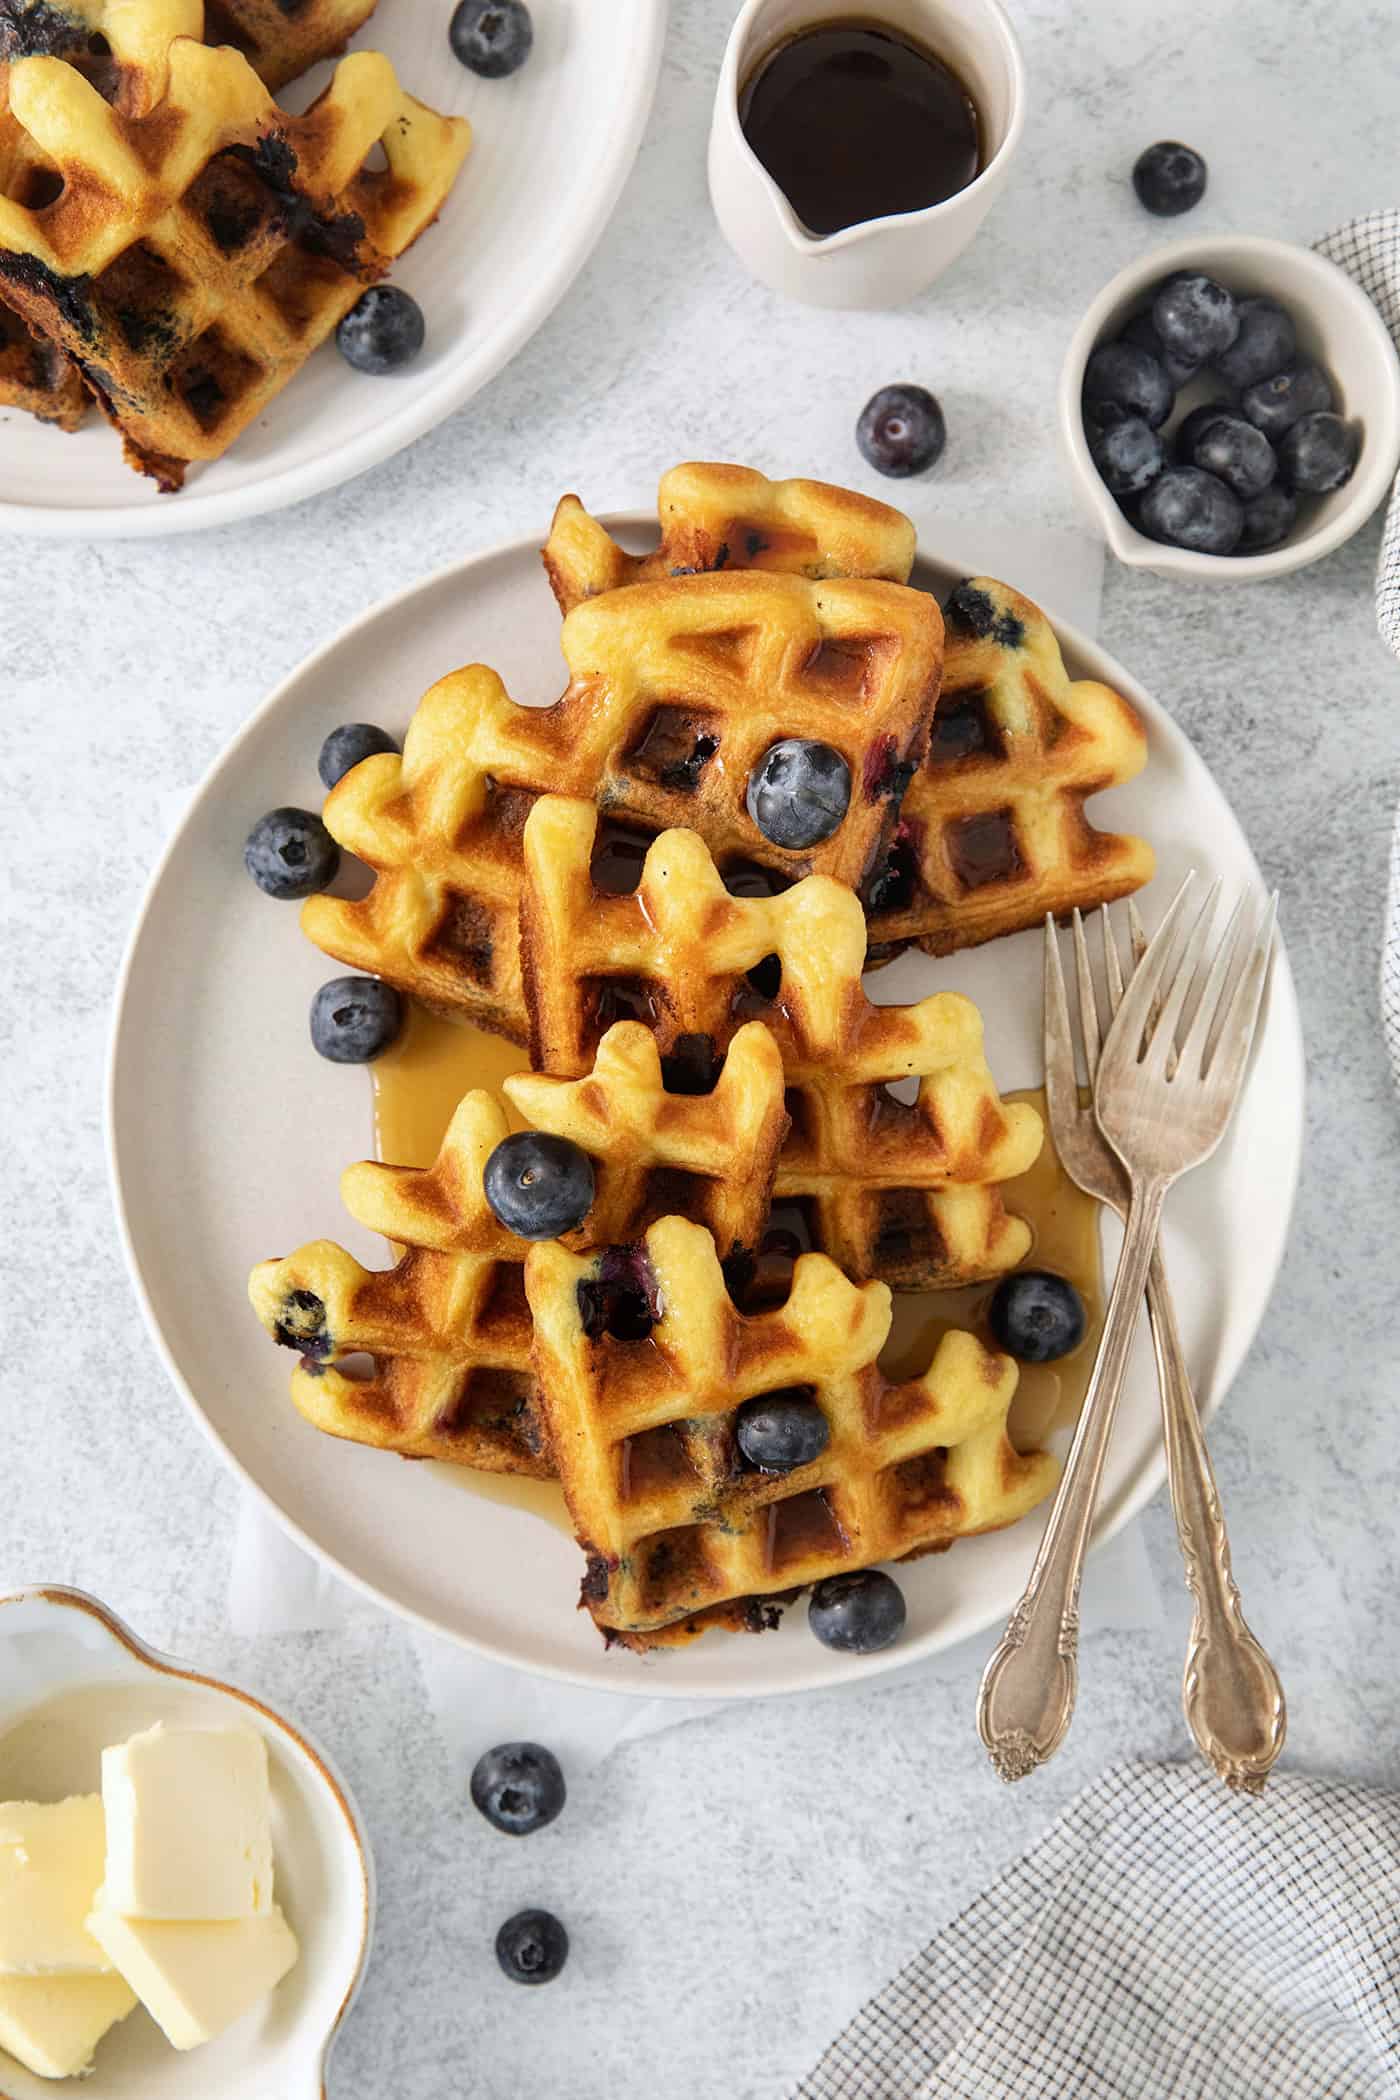 Blueberry waffles topped with blueberries are shown on a white plate with forks.